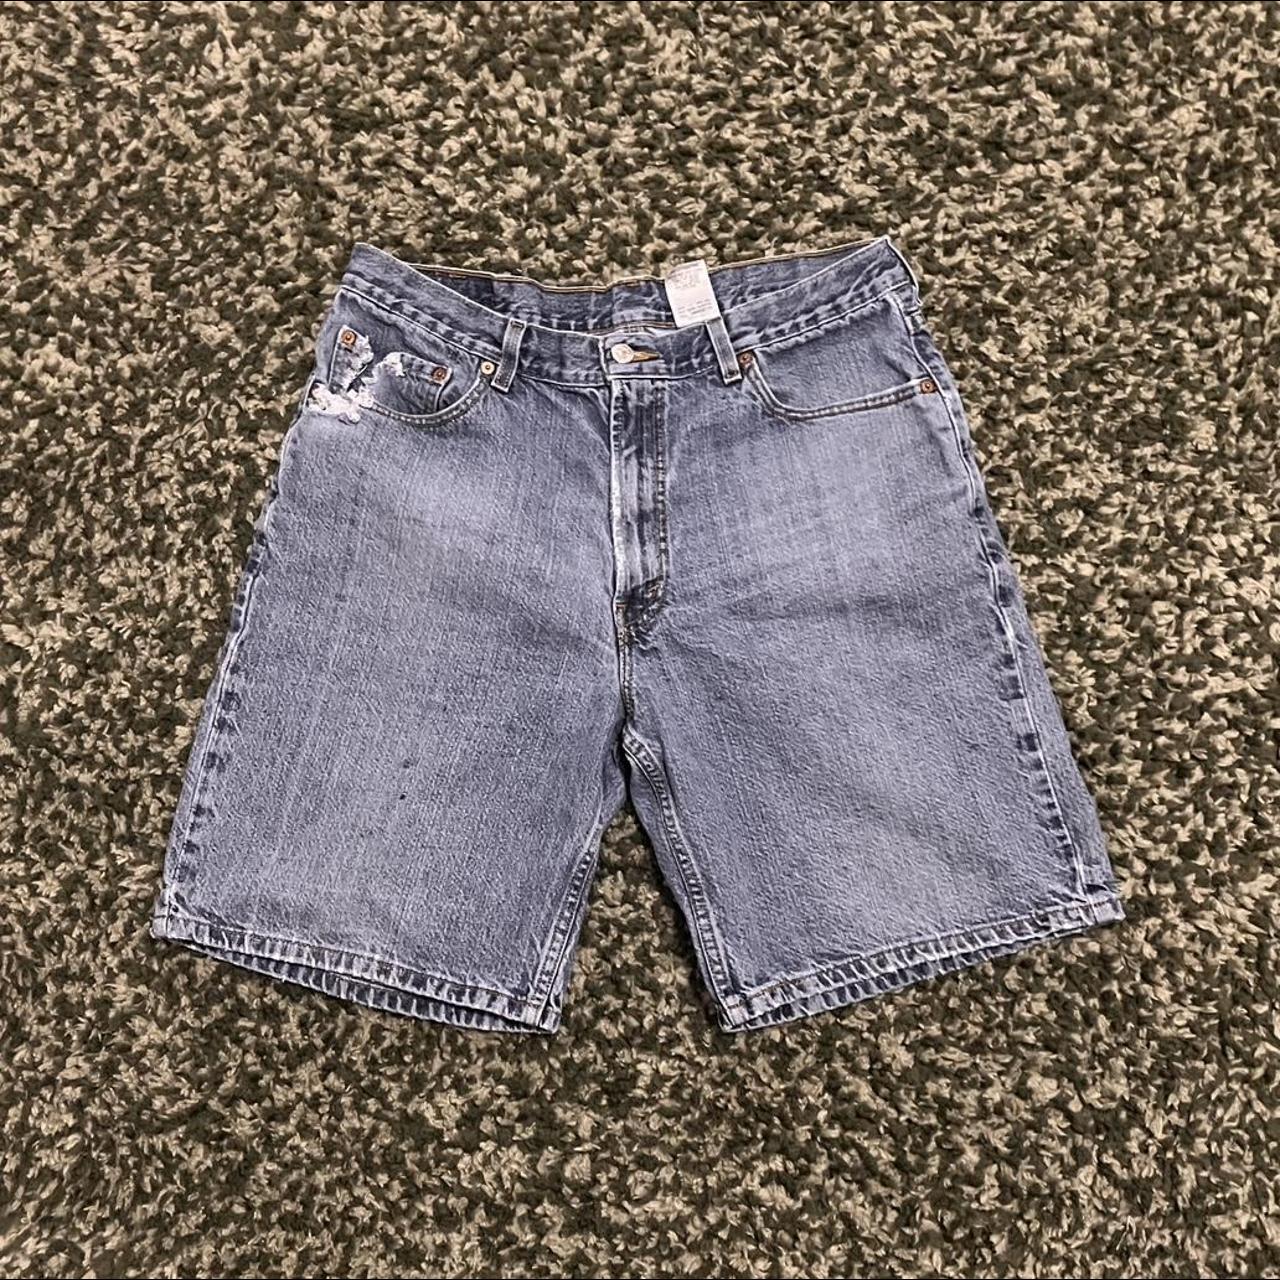 Baggy Levi’s 550 jorts -size 36 -flaws are minor... - Depop